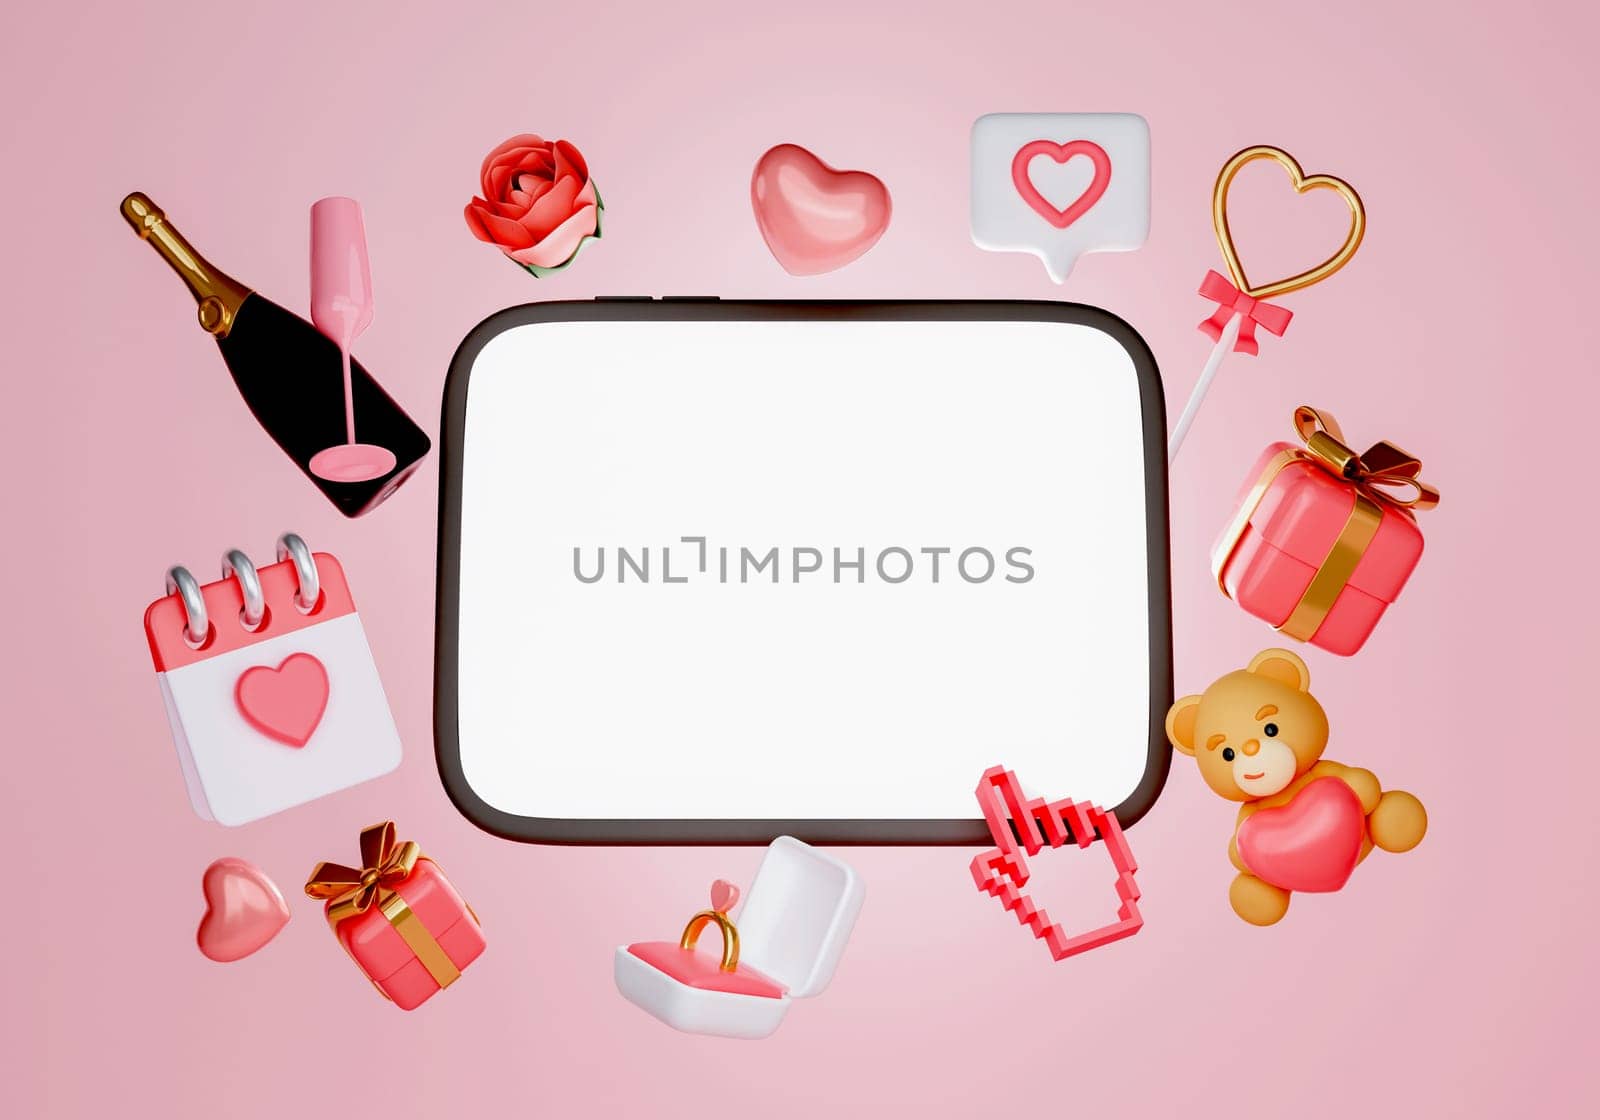 Happy Valentines day background with calendar date 14, gift box, heart shape balloon, digital tablet with copy space blank white on screen, 3D rendering illustration by meepiangraphic